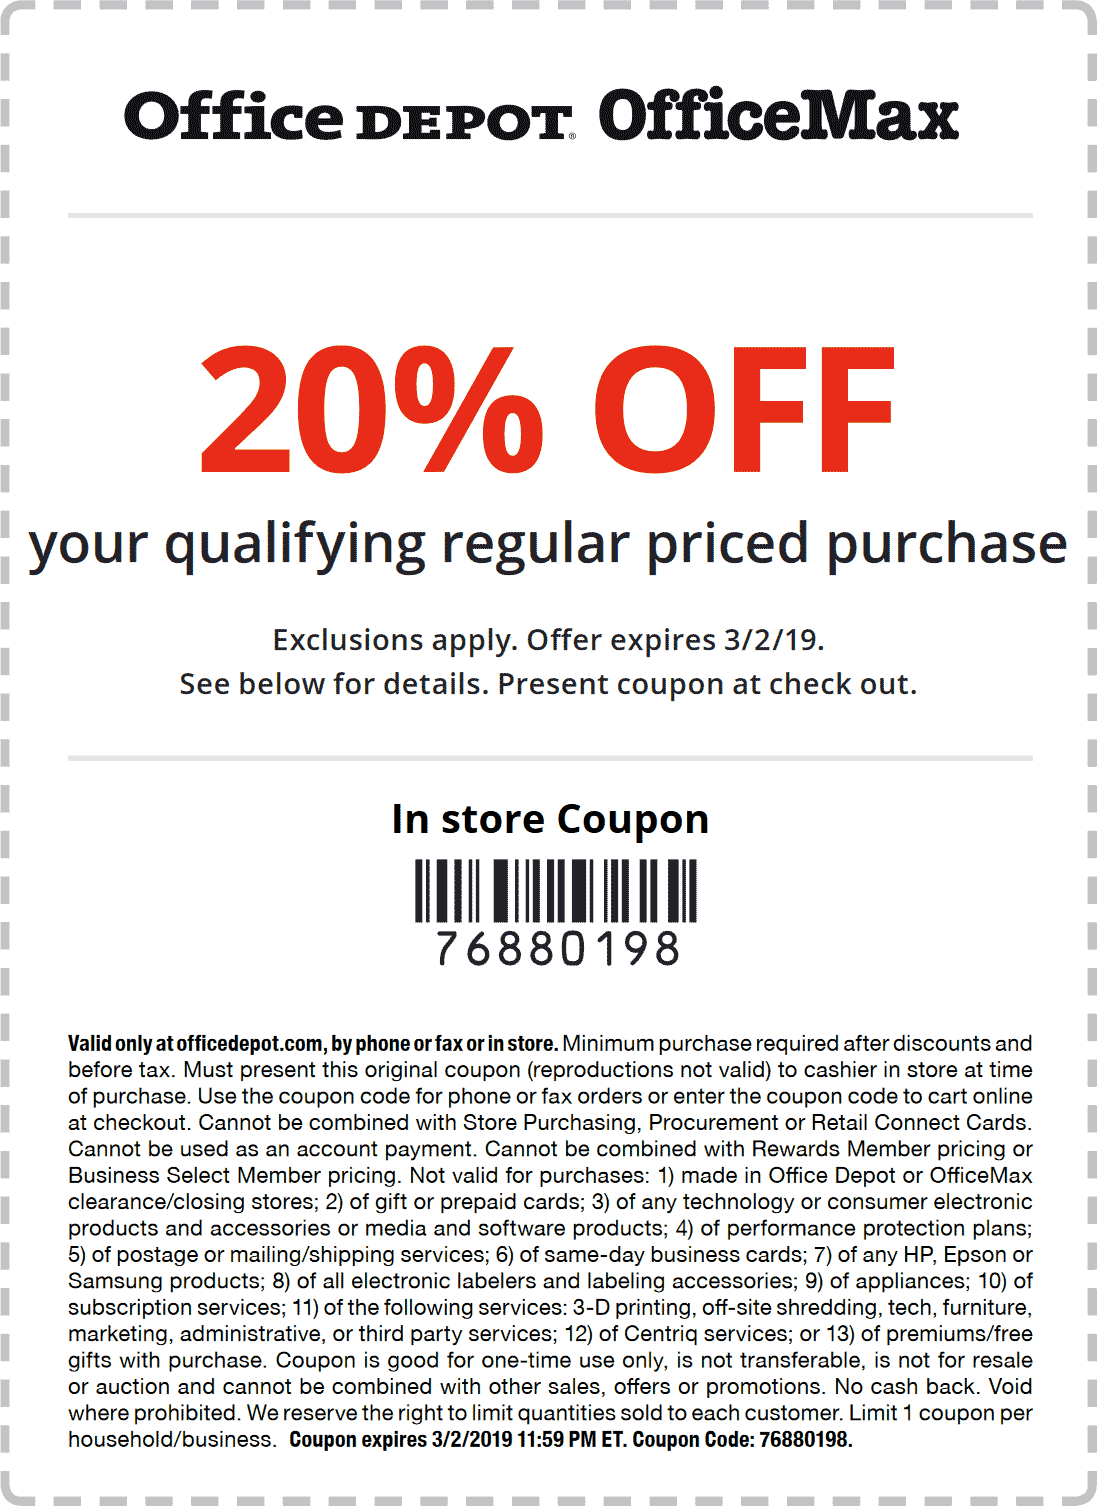 Office Depot coupons & promo code for [May 2022]